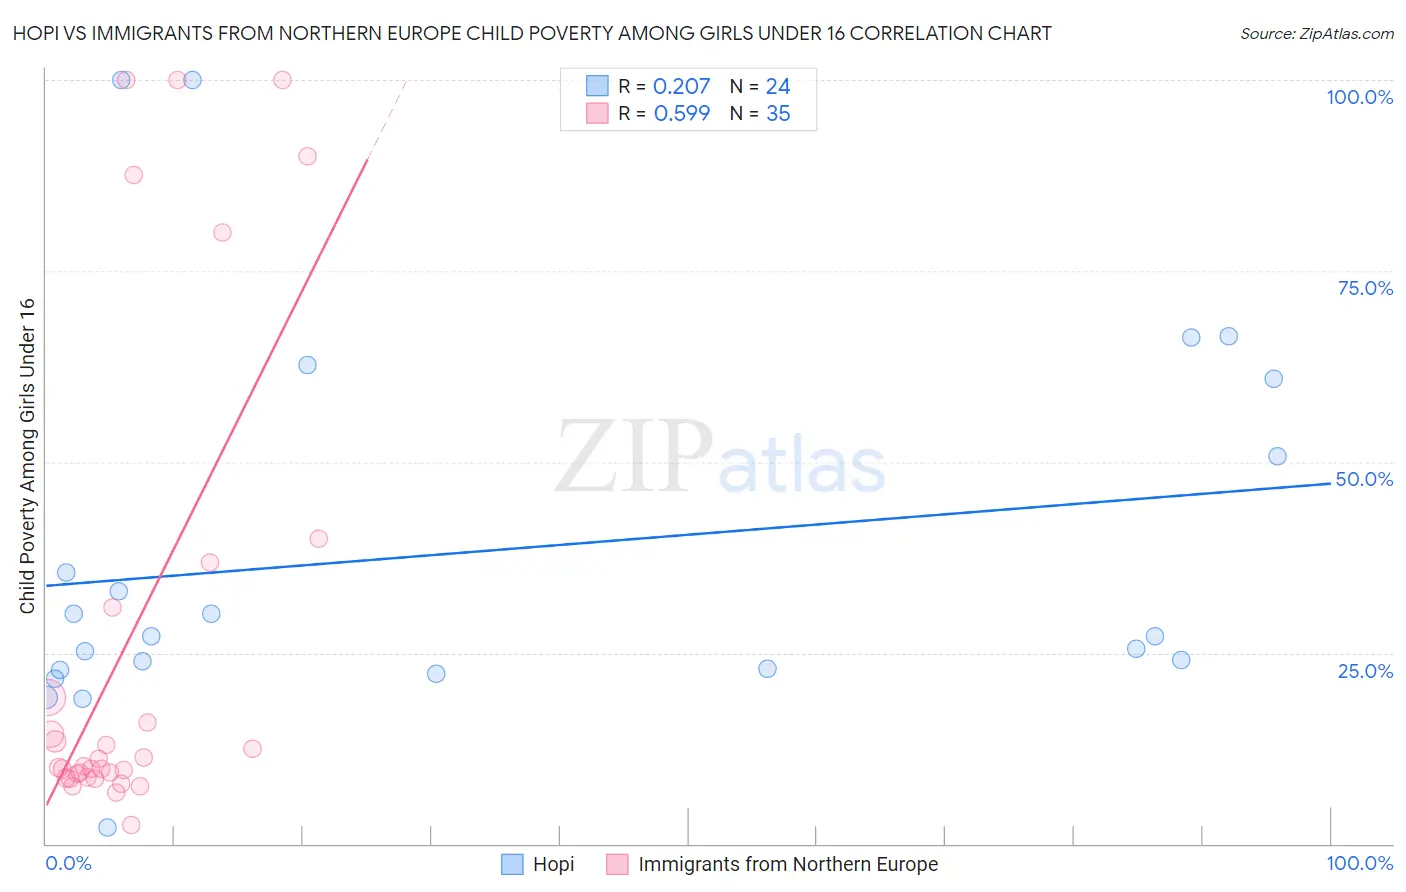 Hopi vs Immigrants from Northern Europe Child Poverty Among Girls Under 16